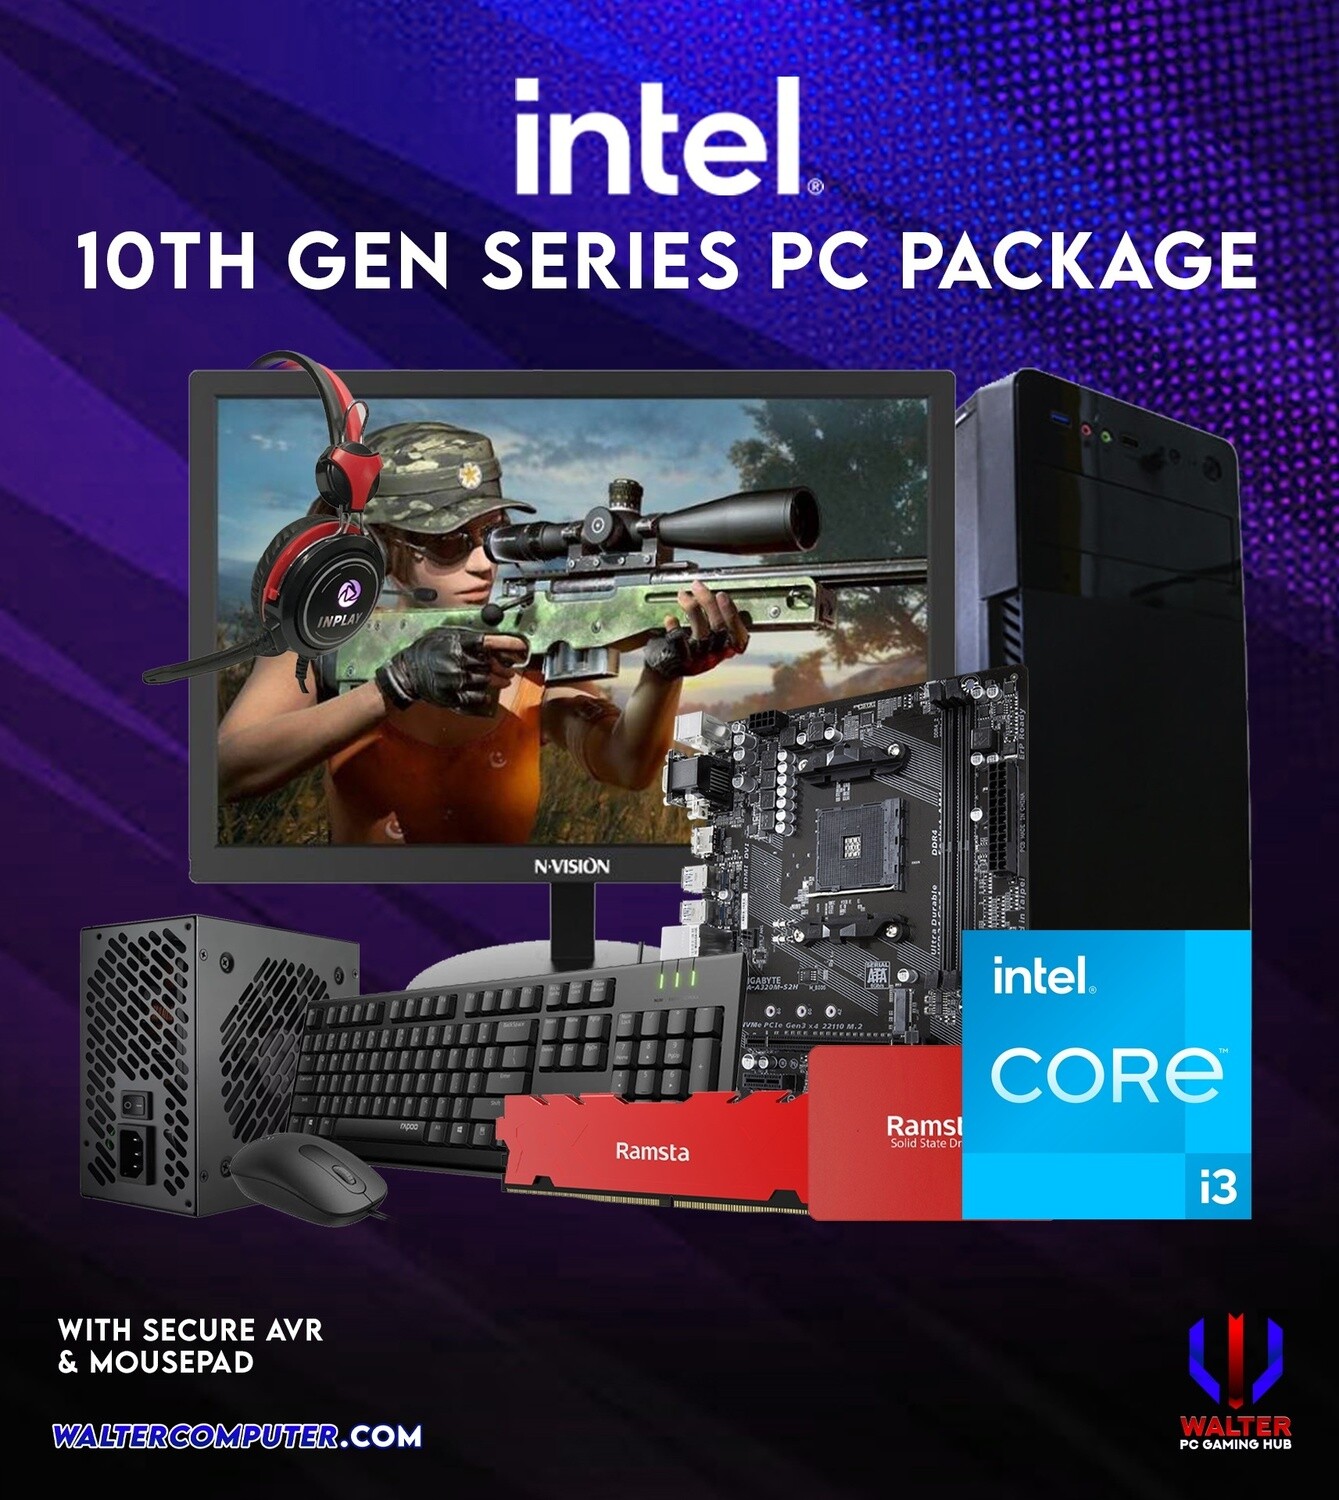 PC Package 13 Intel Core i3-10105